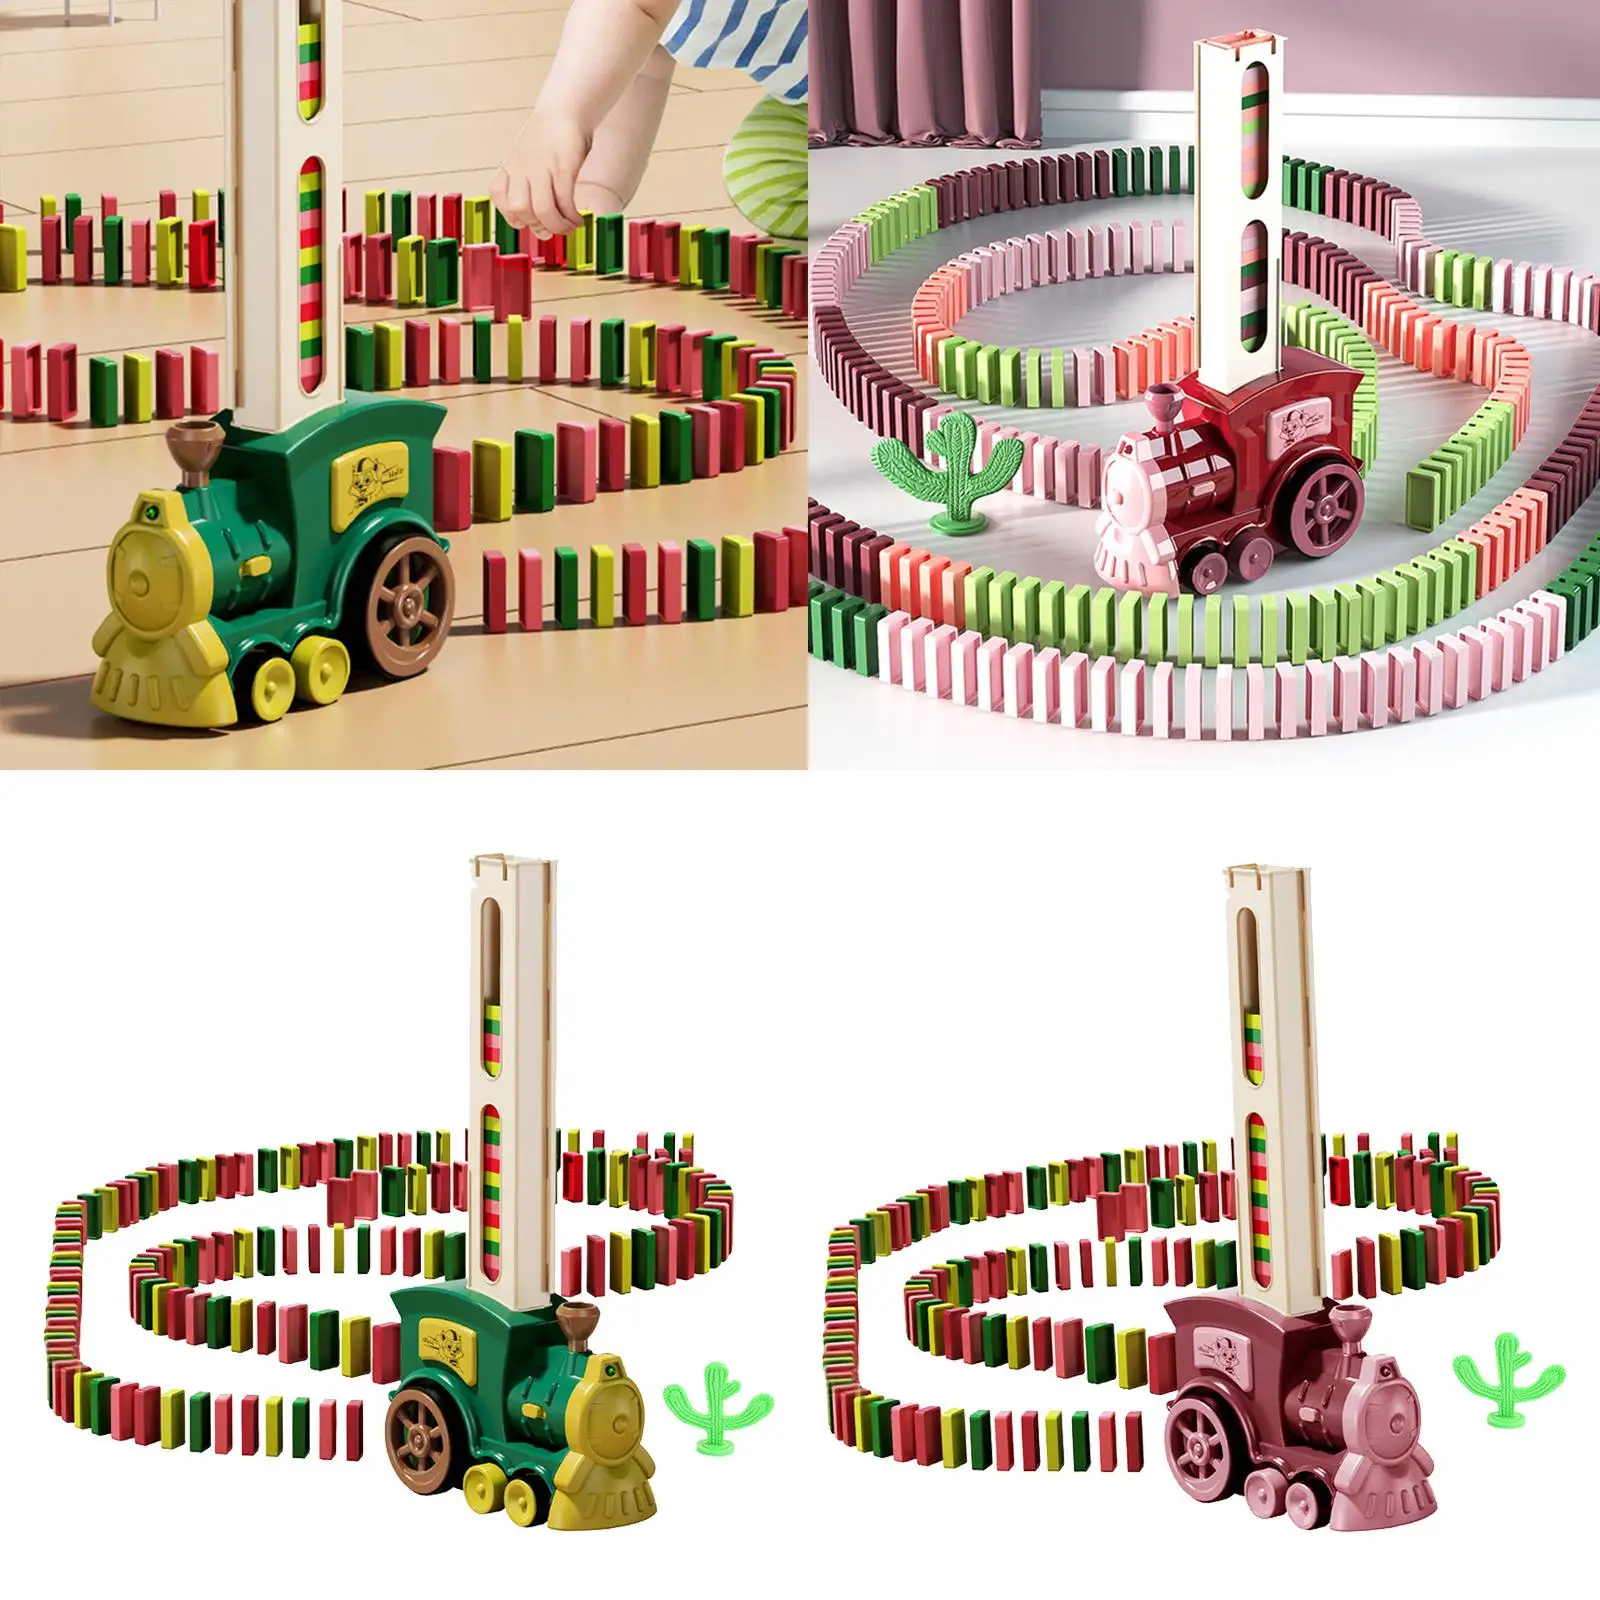 Electric Train Toys Early Learning Education Toys Building and Stacking Toy Laying Toy Train Set for Toddler Boys Girls Kids